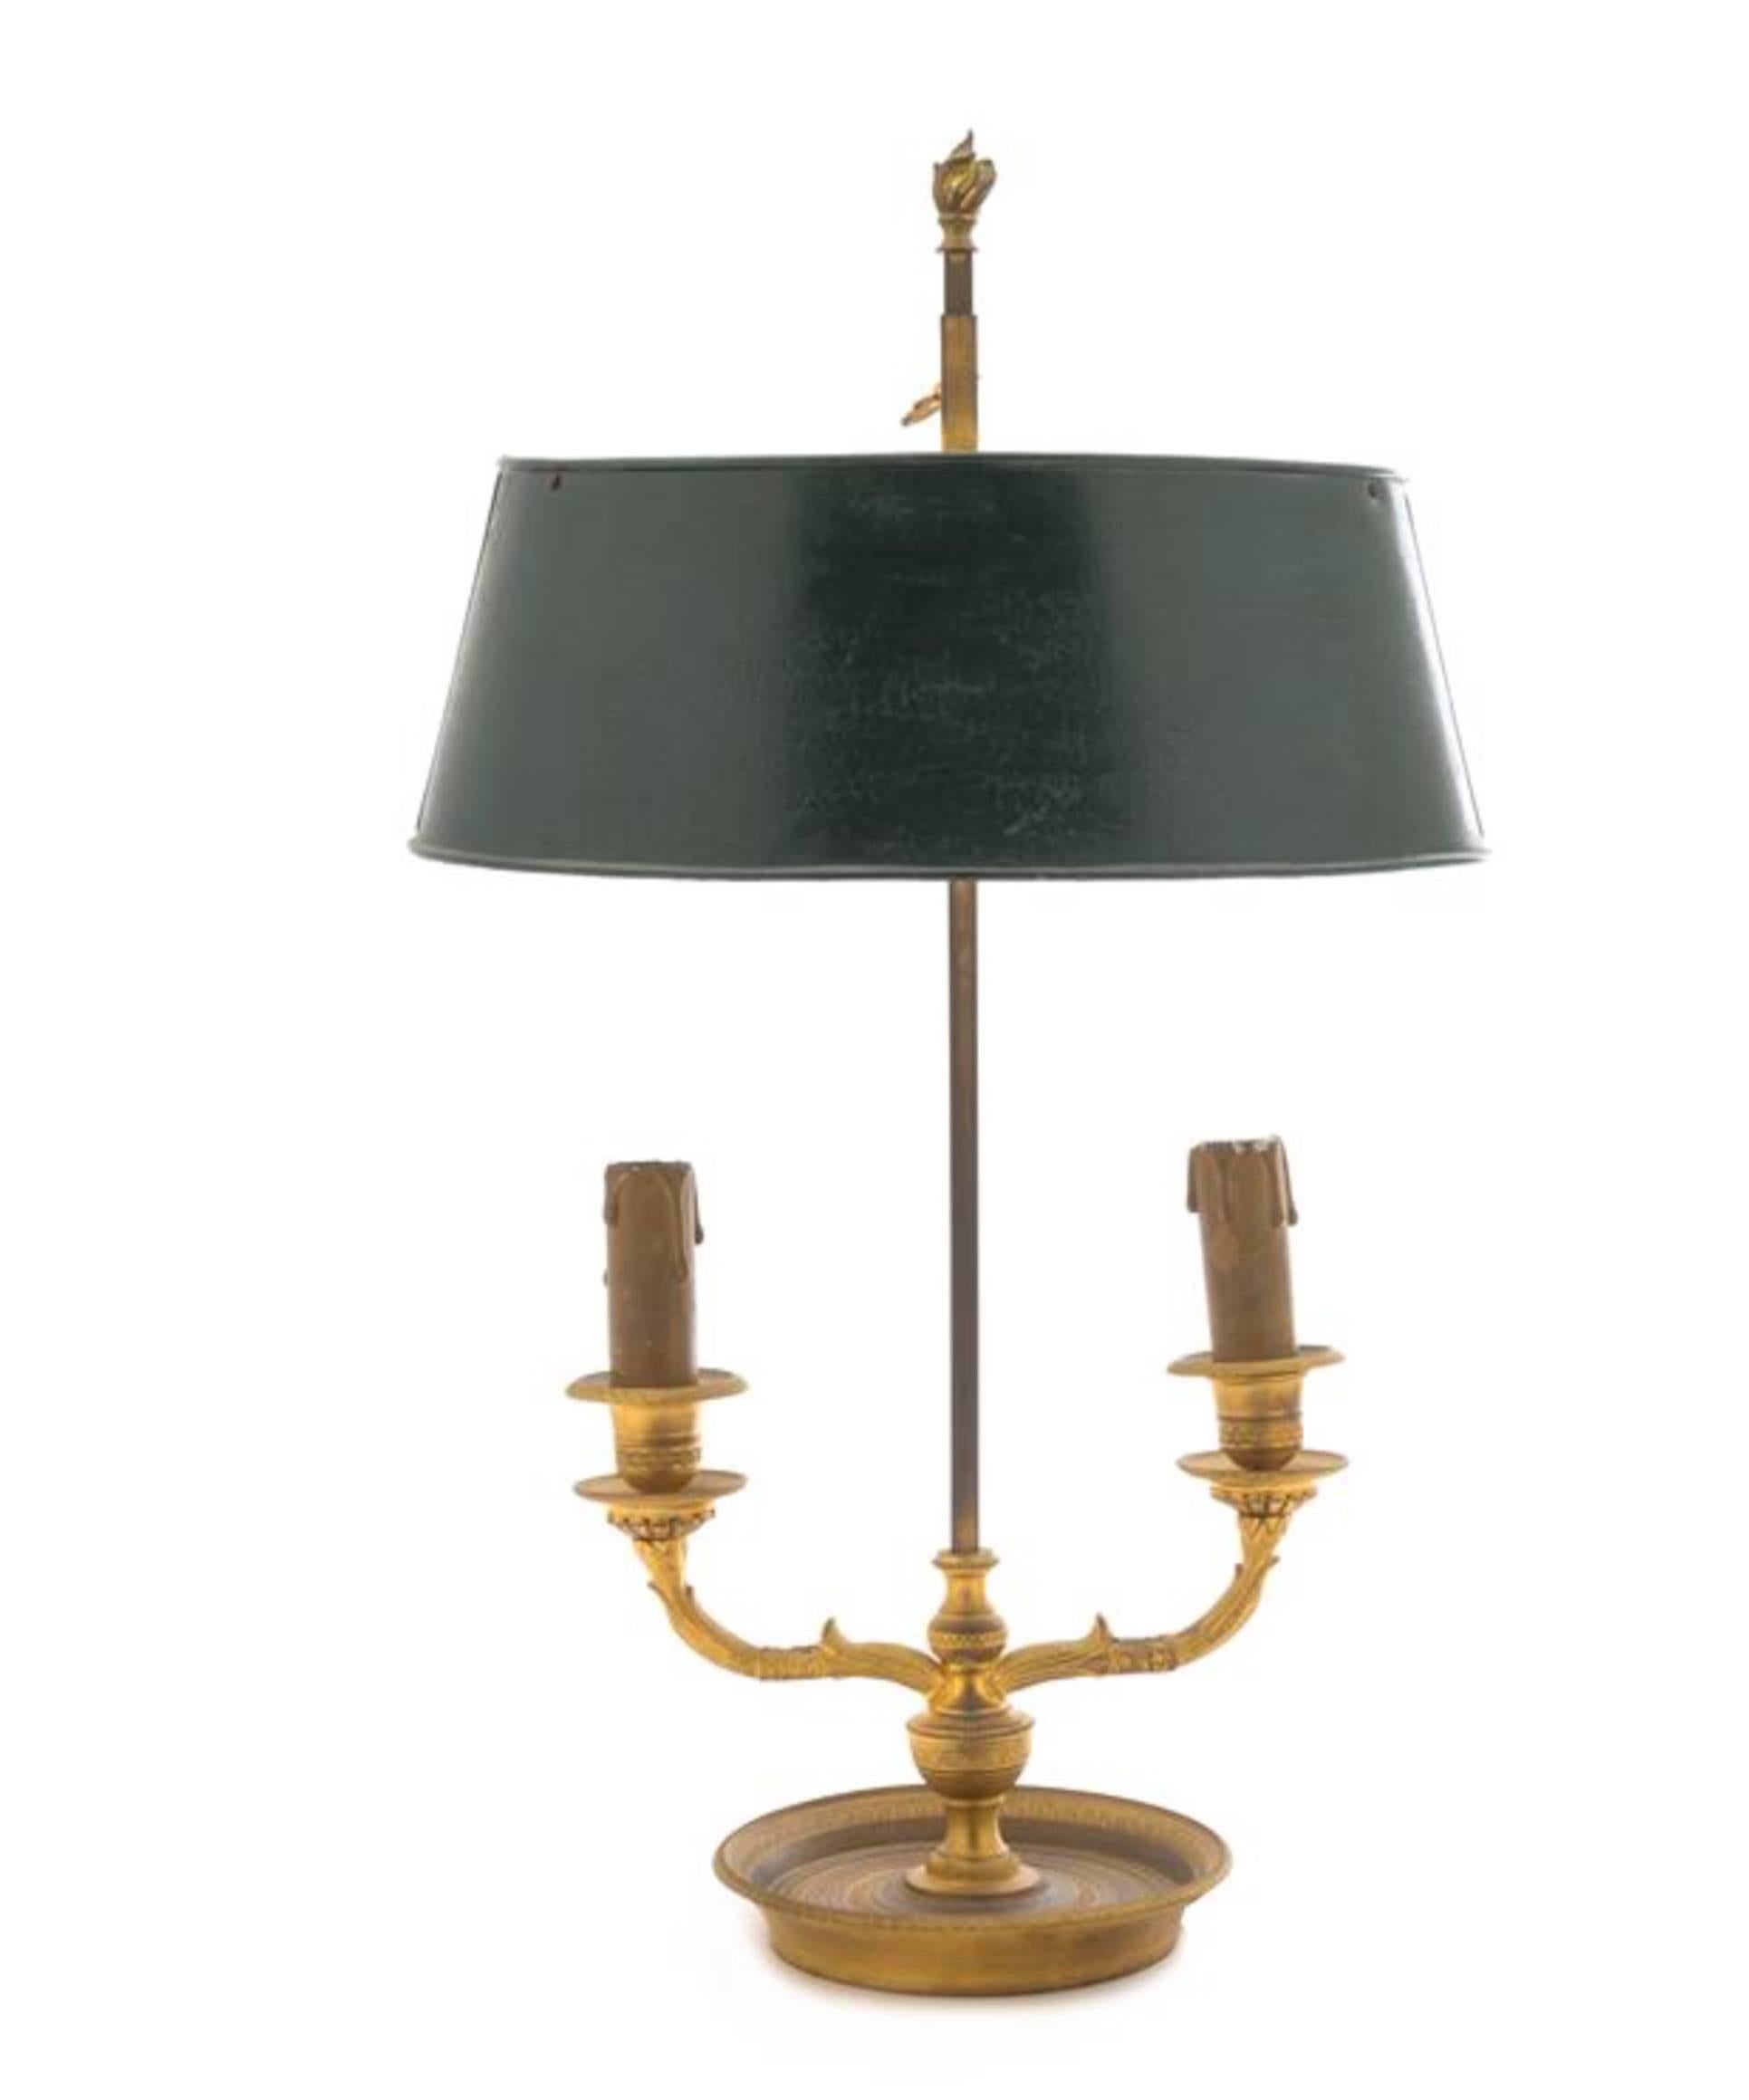 An Empire style gilt bronze two-light Bouillotte lamp
19th century
having a flame finial and two candle arms, with a tole shade.
Measures: Height 19 inches.